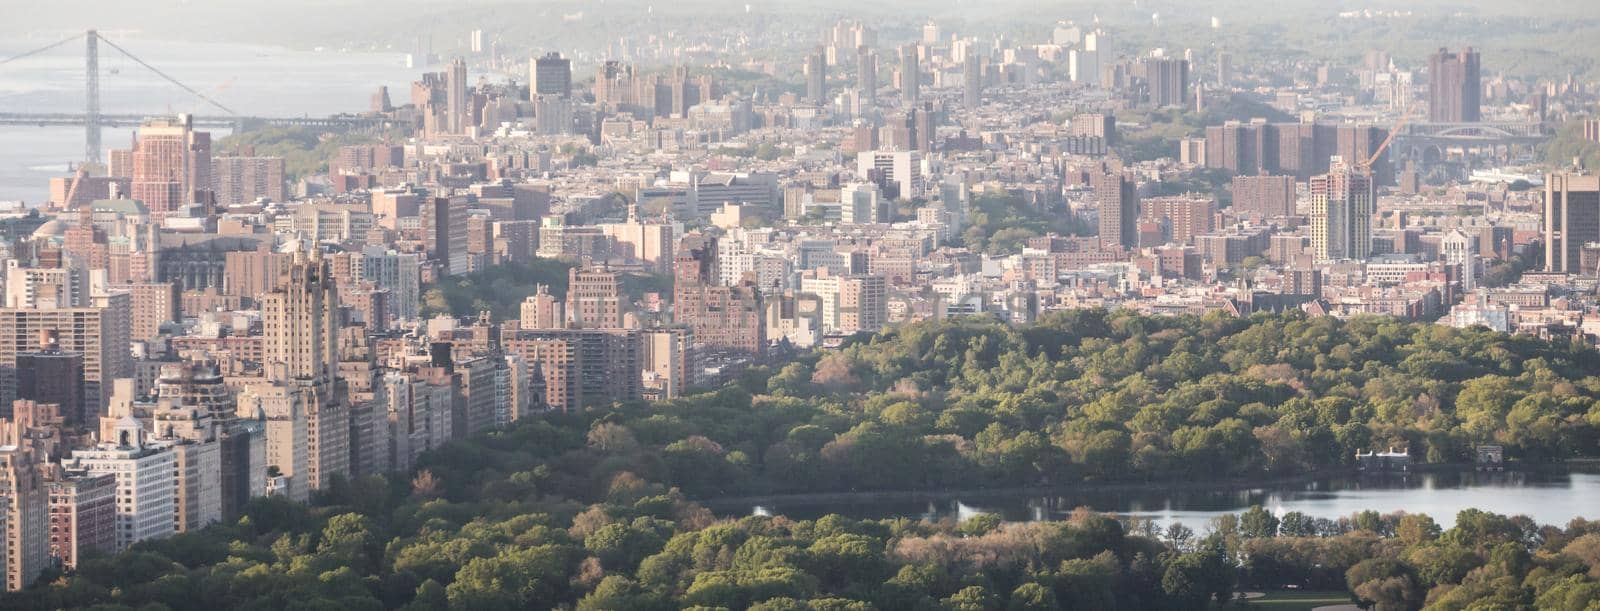 New york, USA - May 17, 2019: Central Park aerial view, Manhattan, New York, Park is surrounded by skyscrapers by Mariakray